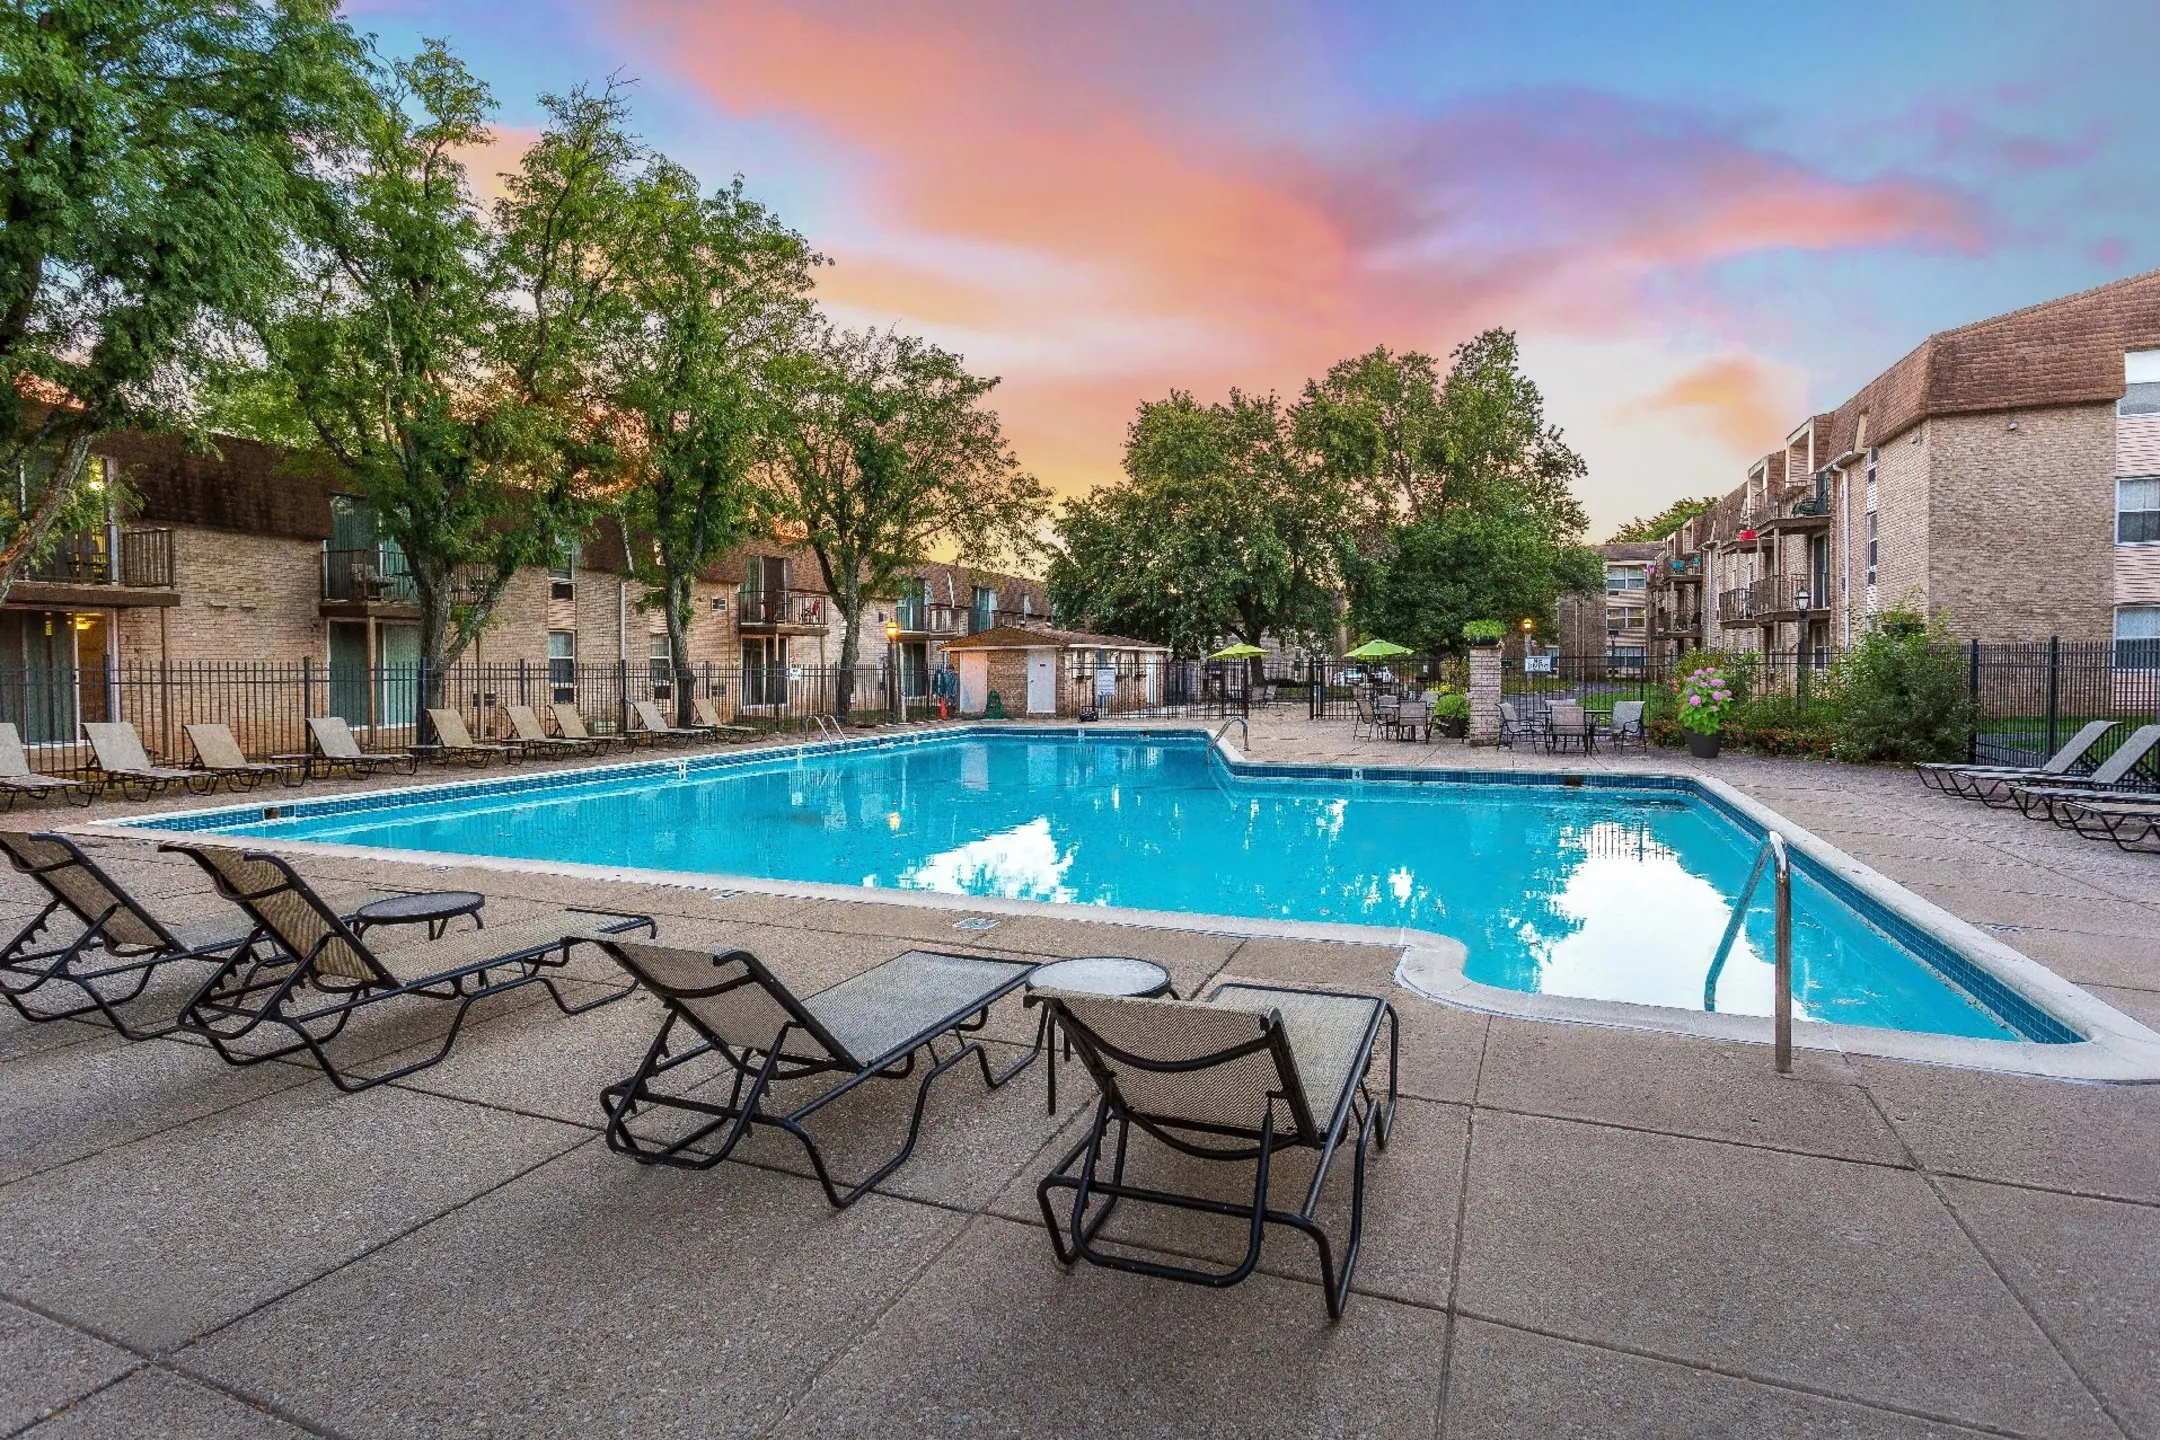 Pool - 450 Green Apartments - Norristown, PA